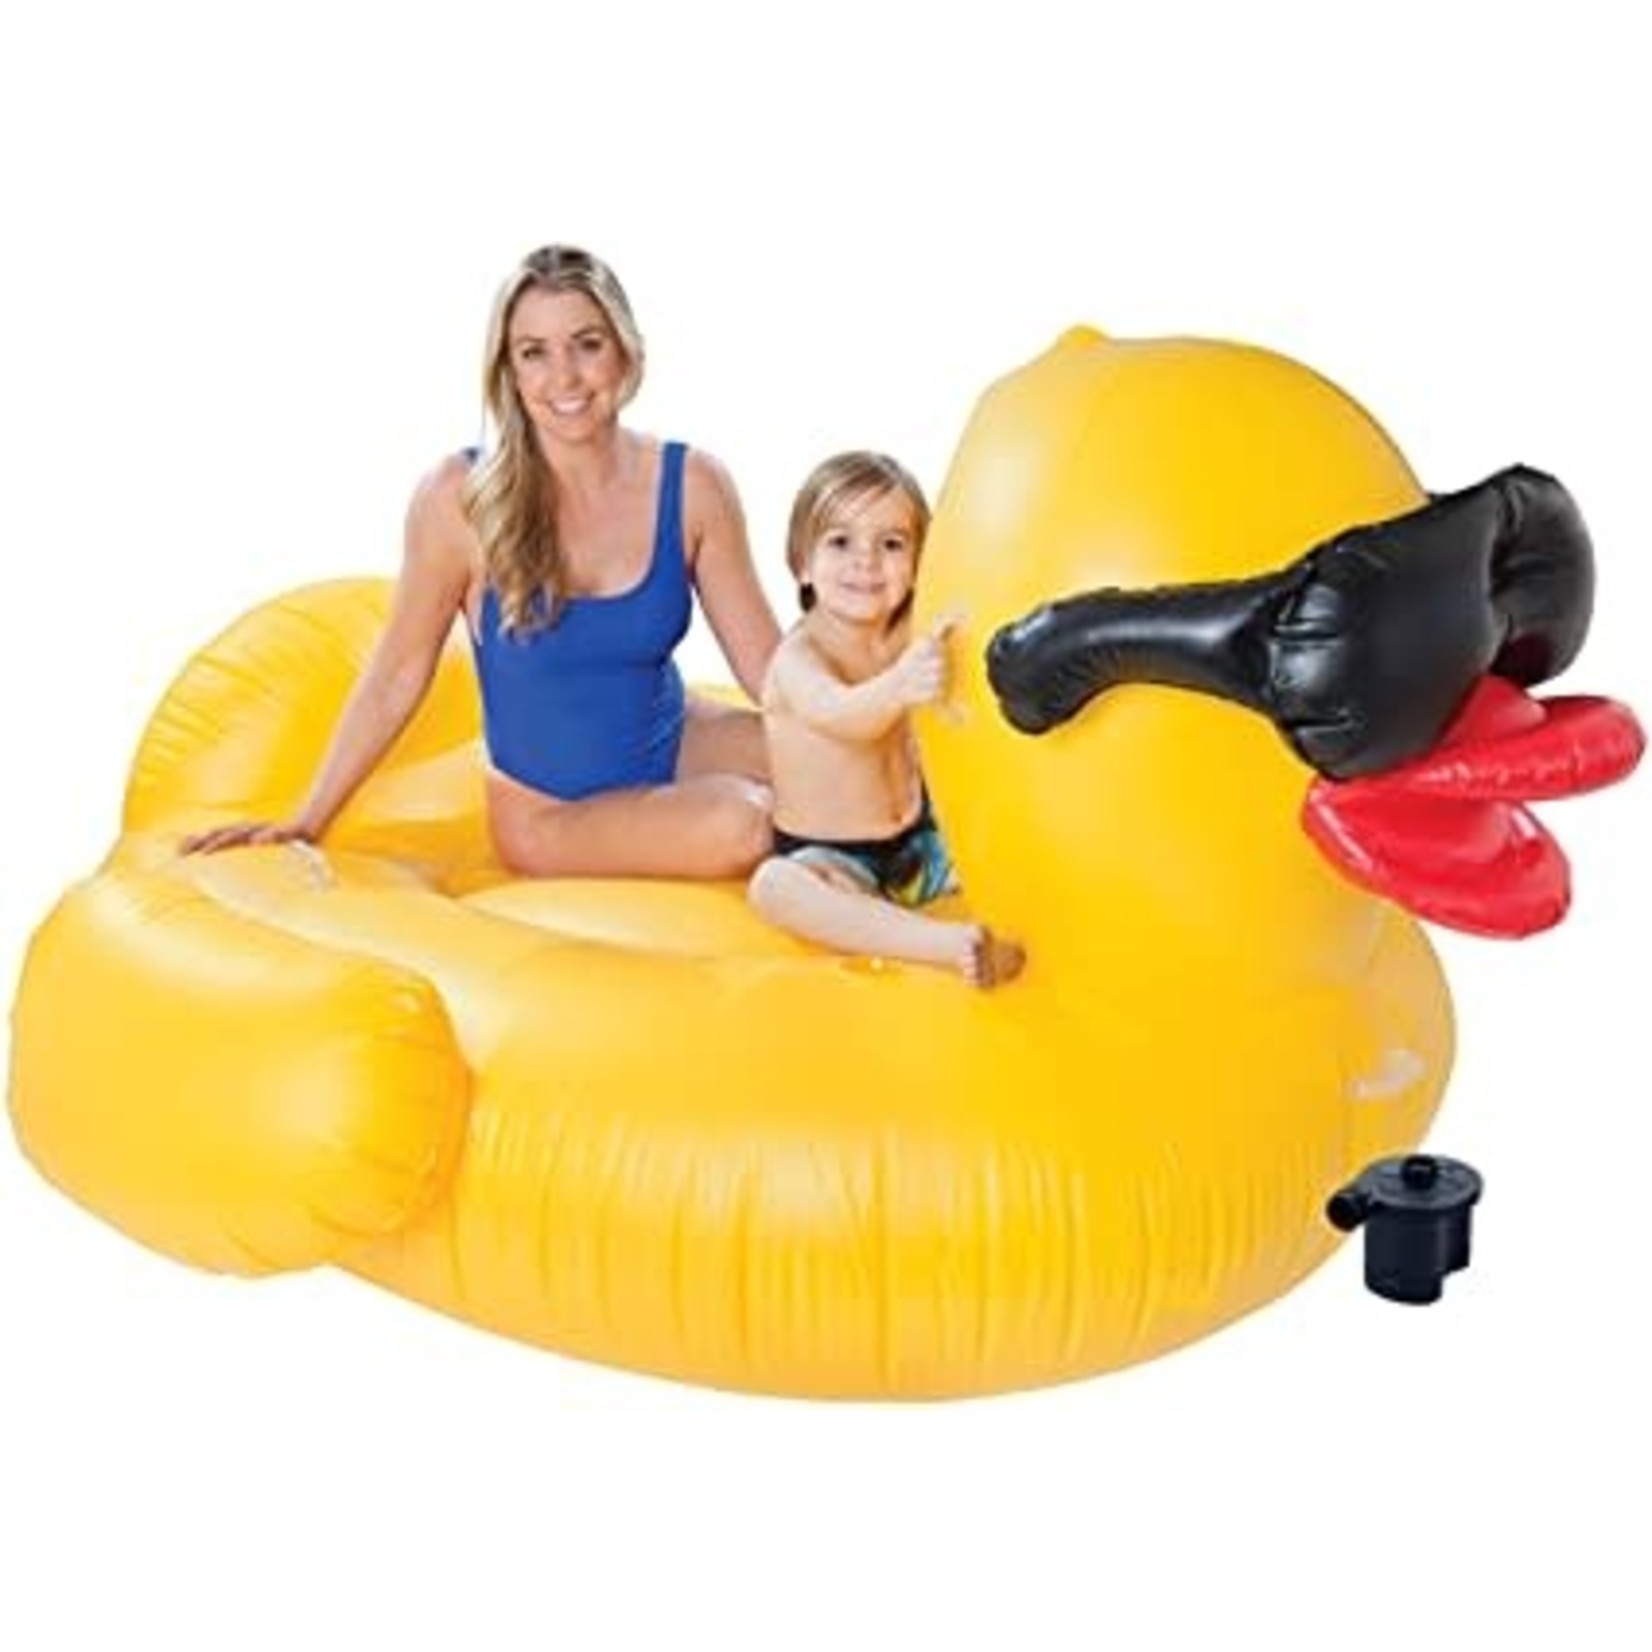 GAME GAME - GIANT INFLATABLE DERBY DUCK